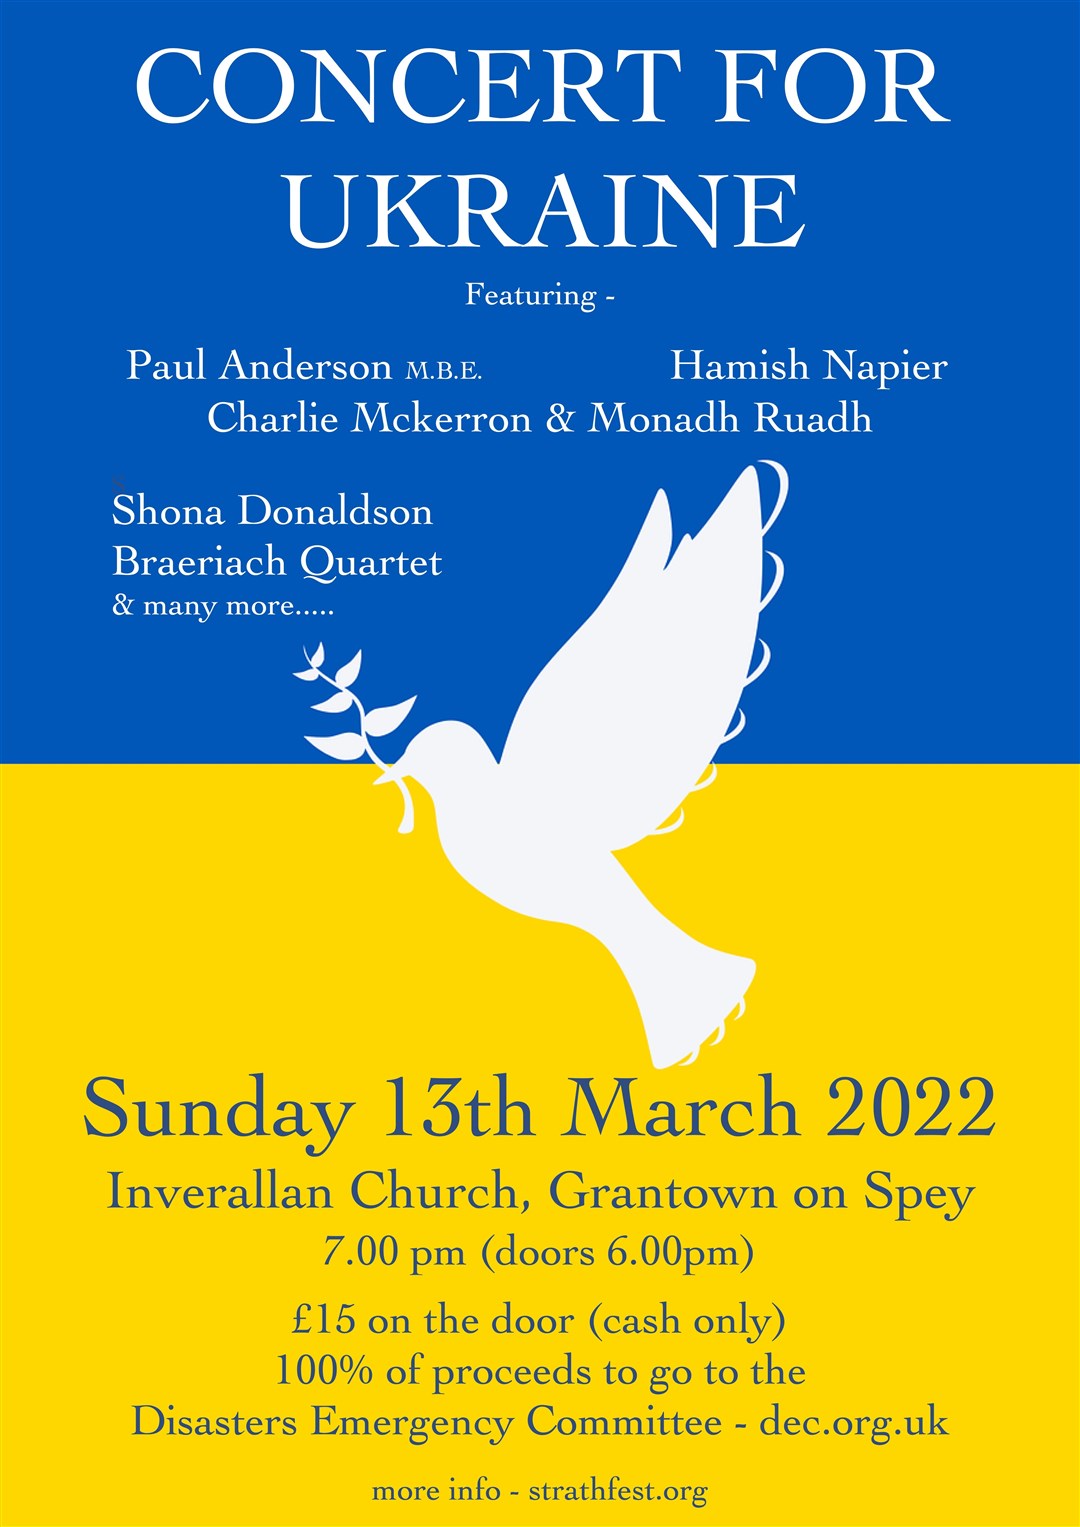 Concert for Ukraine is set to be held on Sunday March 13